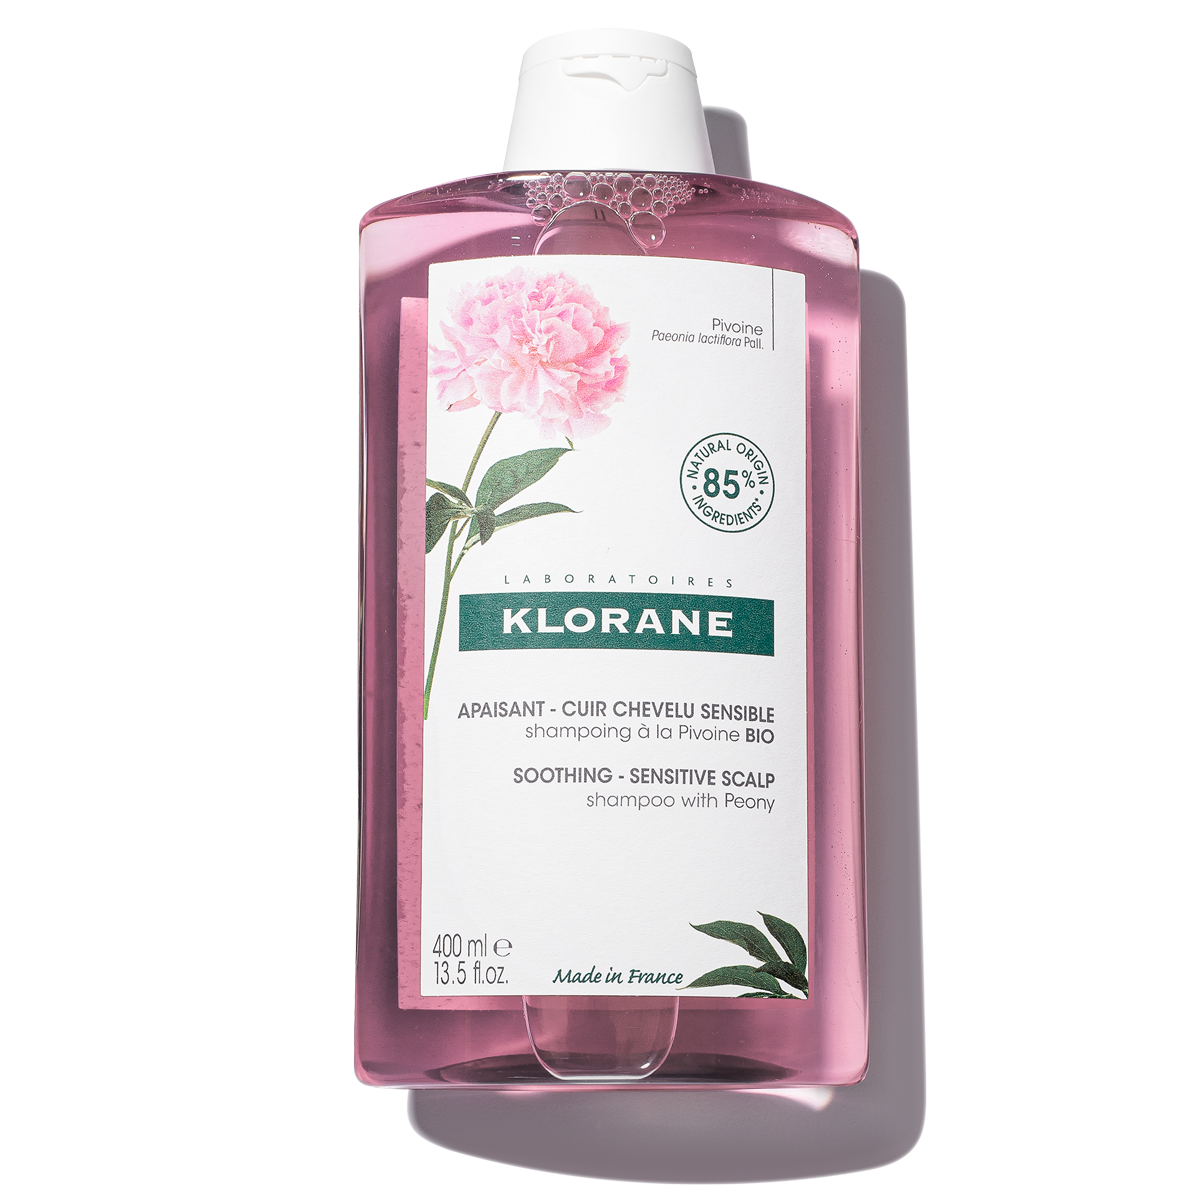 Klorane Shampoo with Peony, Soothing Relief for Dry Itchy Flaky Sensitive Scalp, pH Balanced, Provides Scalp Comfort 13.5 Fl Oz (Pack of 1) Shampoo